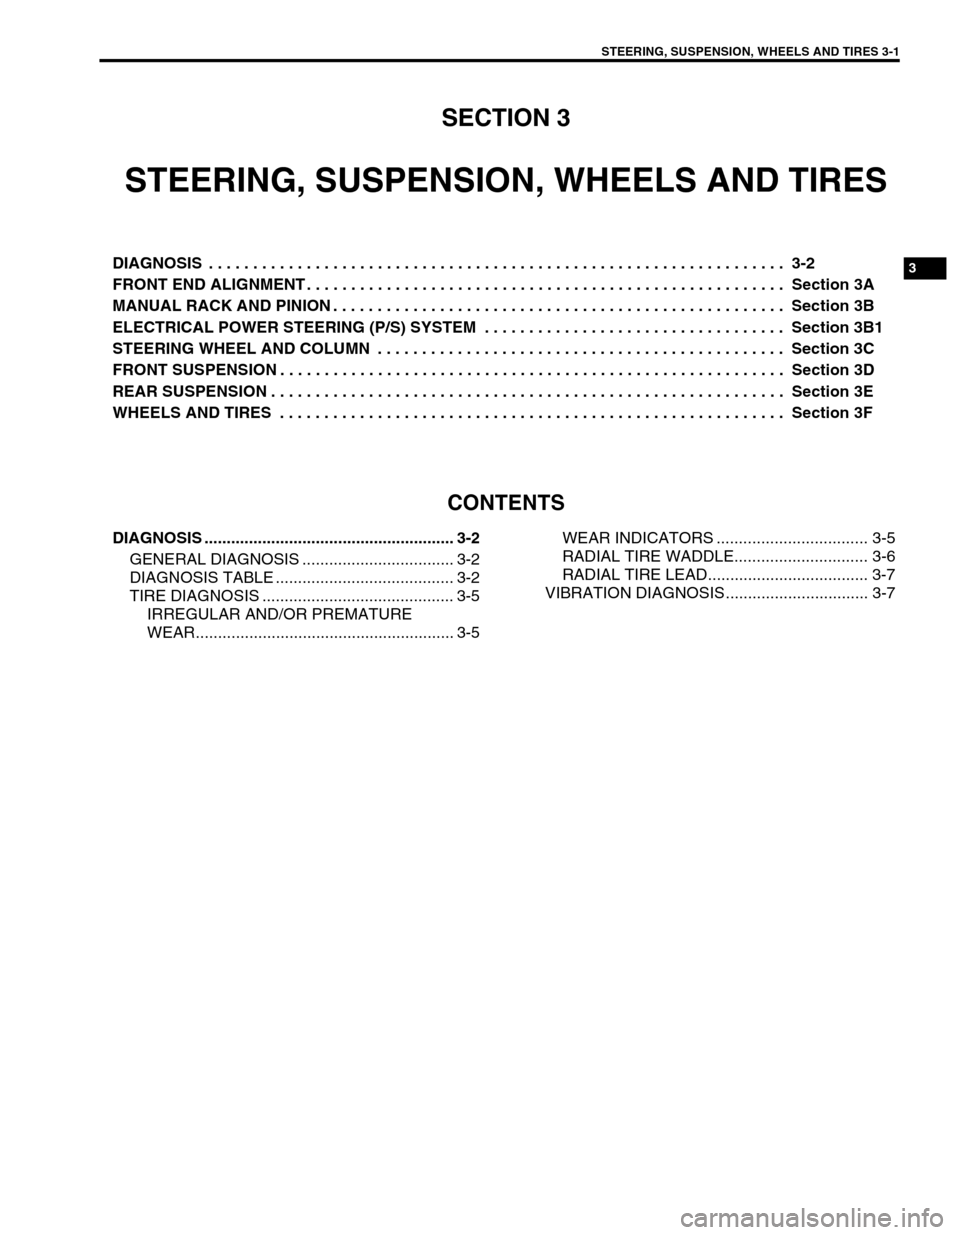 SUZUKI SWIFT 2000 1.G RG413 Service Workshop Manual STEERING, SUSPENSION, WHEELS AND TIRES 3-1
6F1
6F2
6G
6H
6K
3
7A1
7B1
7C1
7D
7E
7F
8A
8B
8C
8D
8E
9
10
10A
10B
SECTION 3
STEERING, SUSPENSION, WHEELS AND TIRES
DIAGNOSIS  . . . . . . . . . . . . . . .